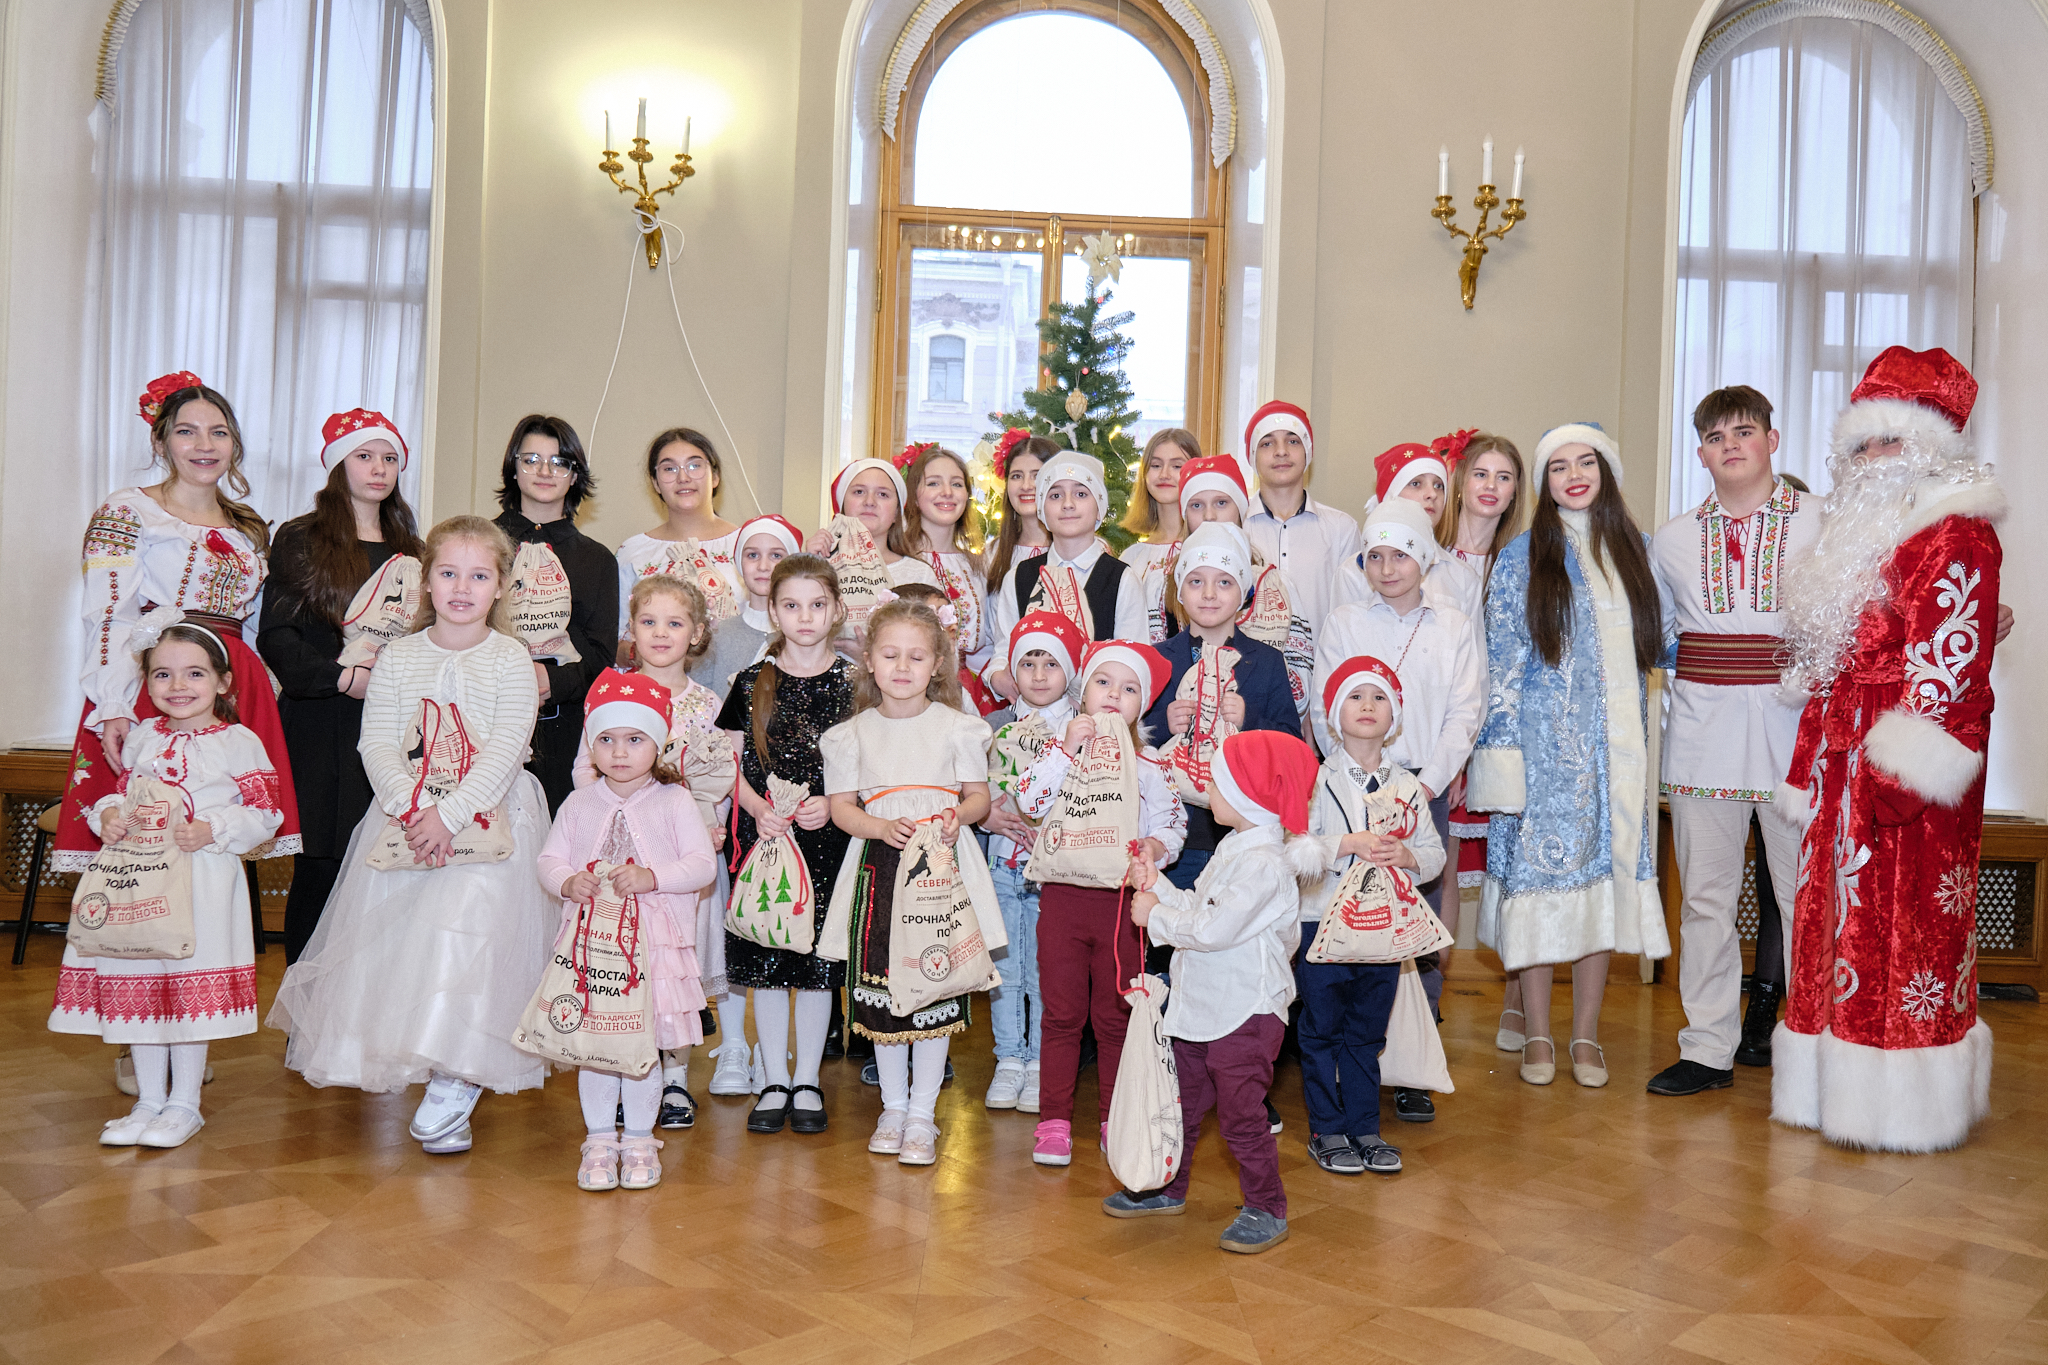 On the occasion of the winter holidays carols and greetings were sung in the city of St. Petersburg in the Russian Federation